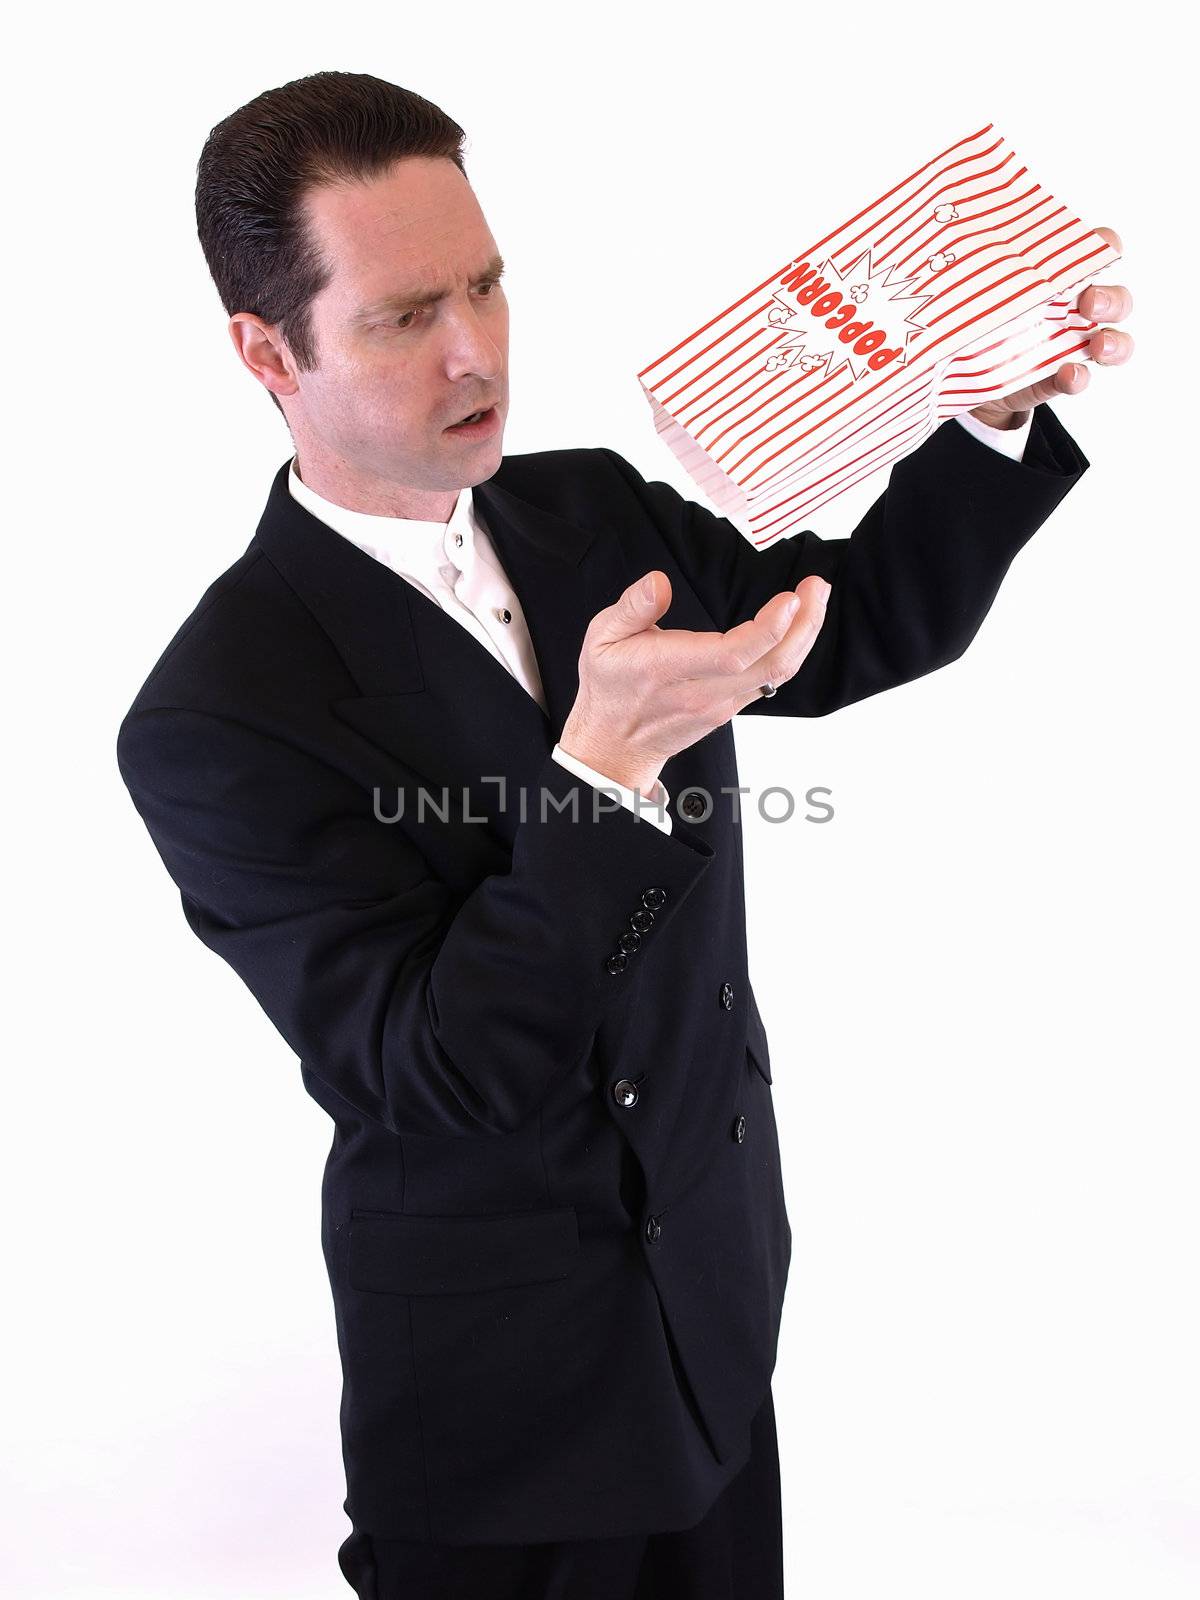 A white male in a suit shakes a bag of popcorn into his hand.  He is frustrated because there is no more.